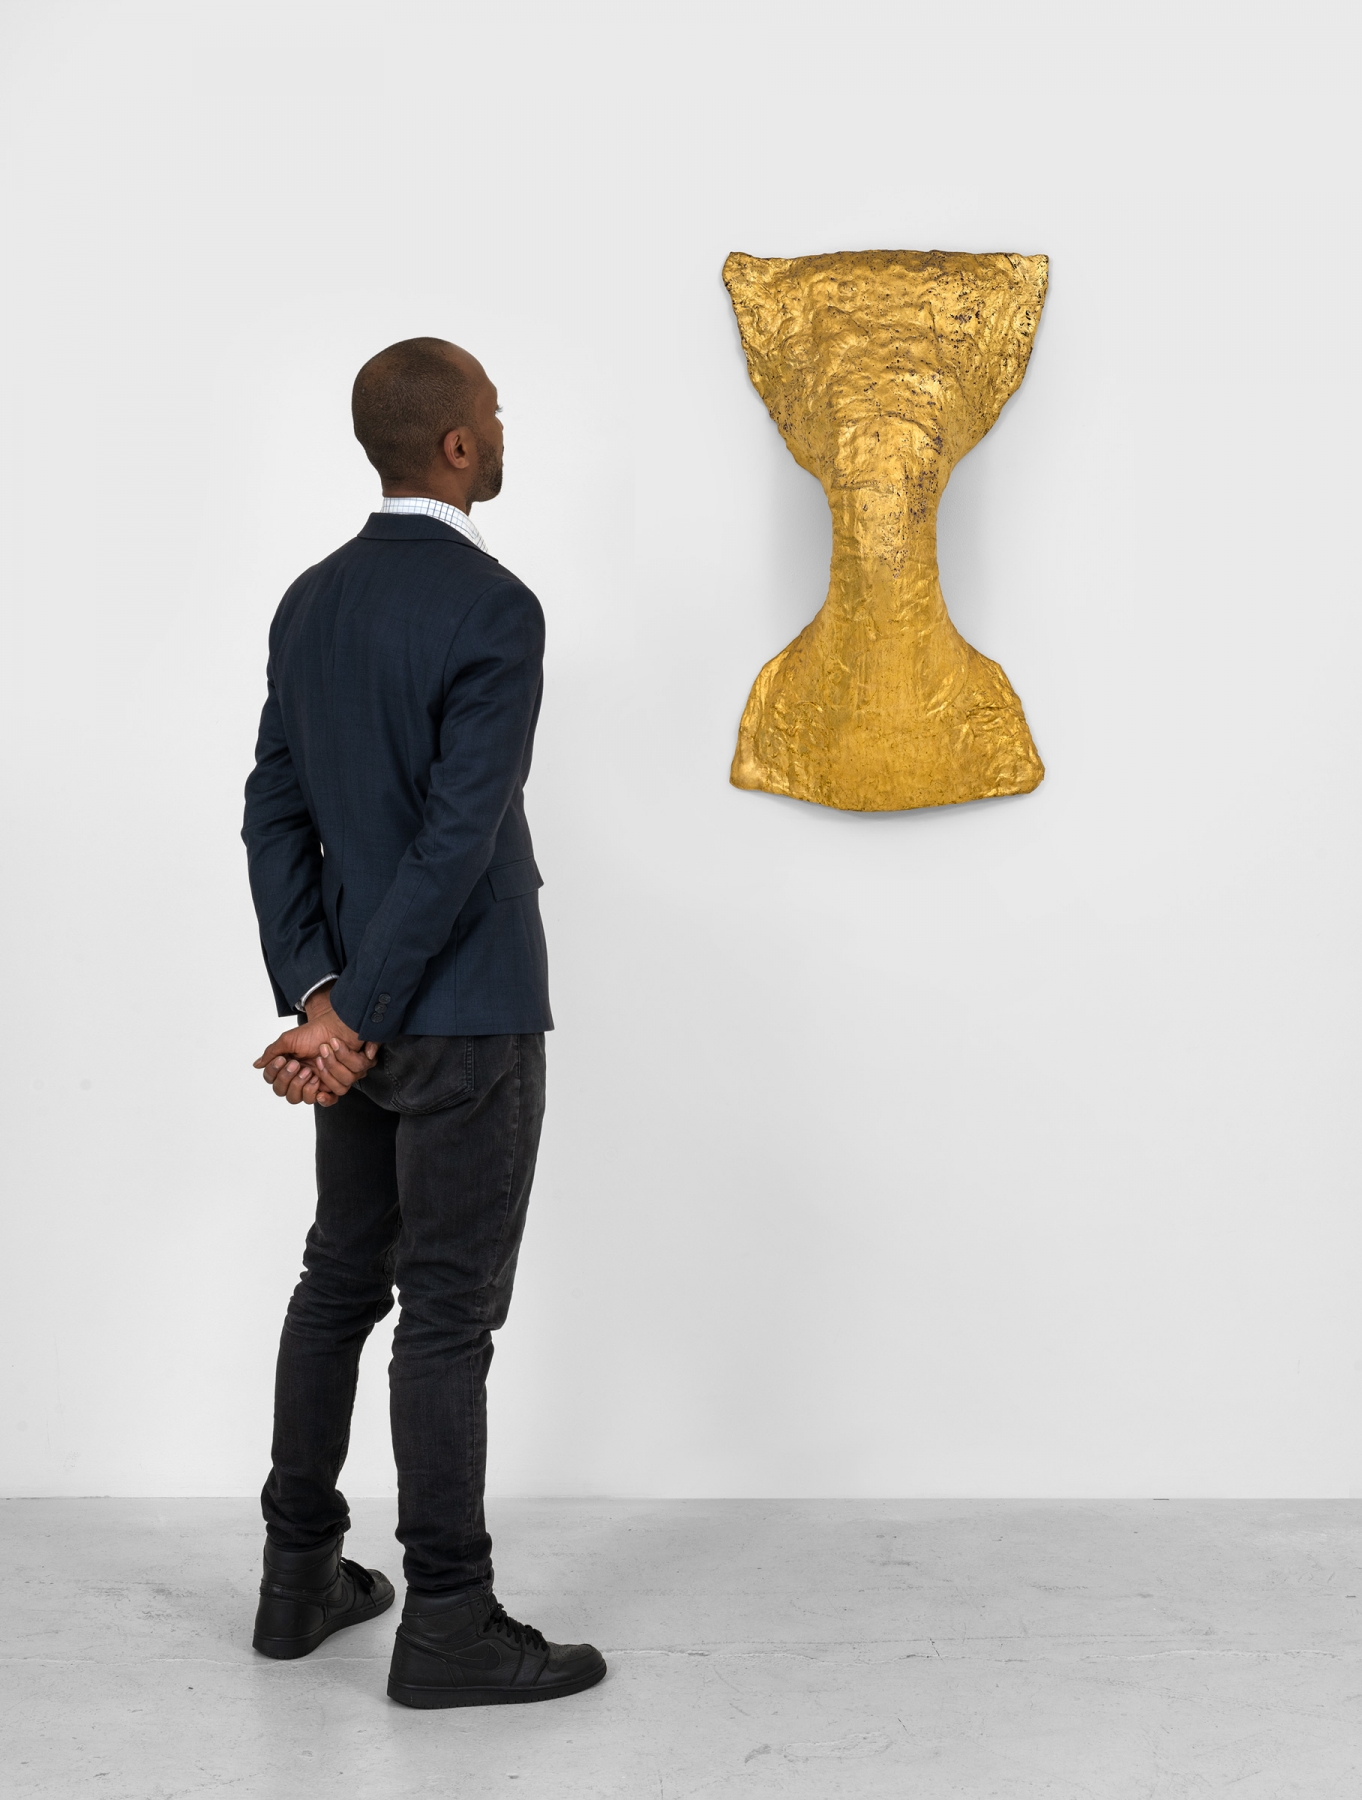 Lynda Benglis
FIGURE I&nbsp; 1978
Chicken wire, cotton, plaster, gesso, oil based size, gold leaf
34 3/4 x 20 x 7 3/4 inches
88.3 x 50.8 x 19.7 centimeters
CR# BE.308